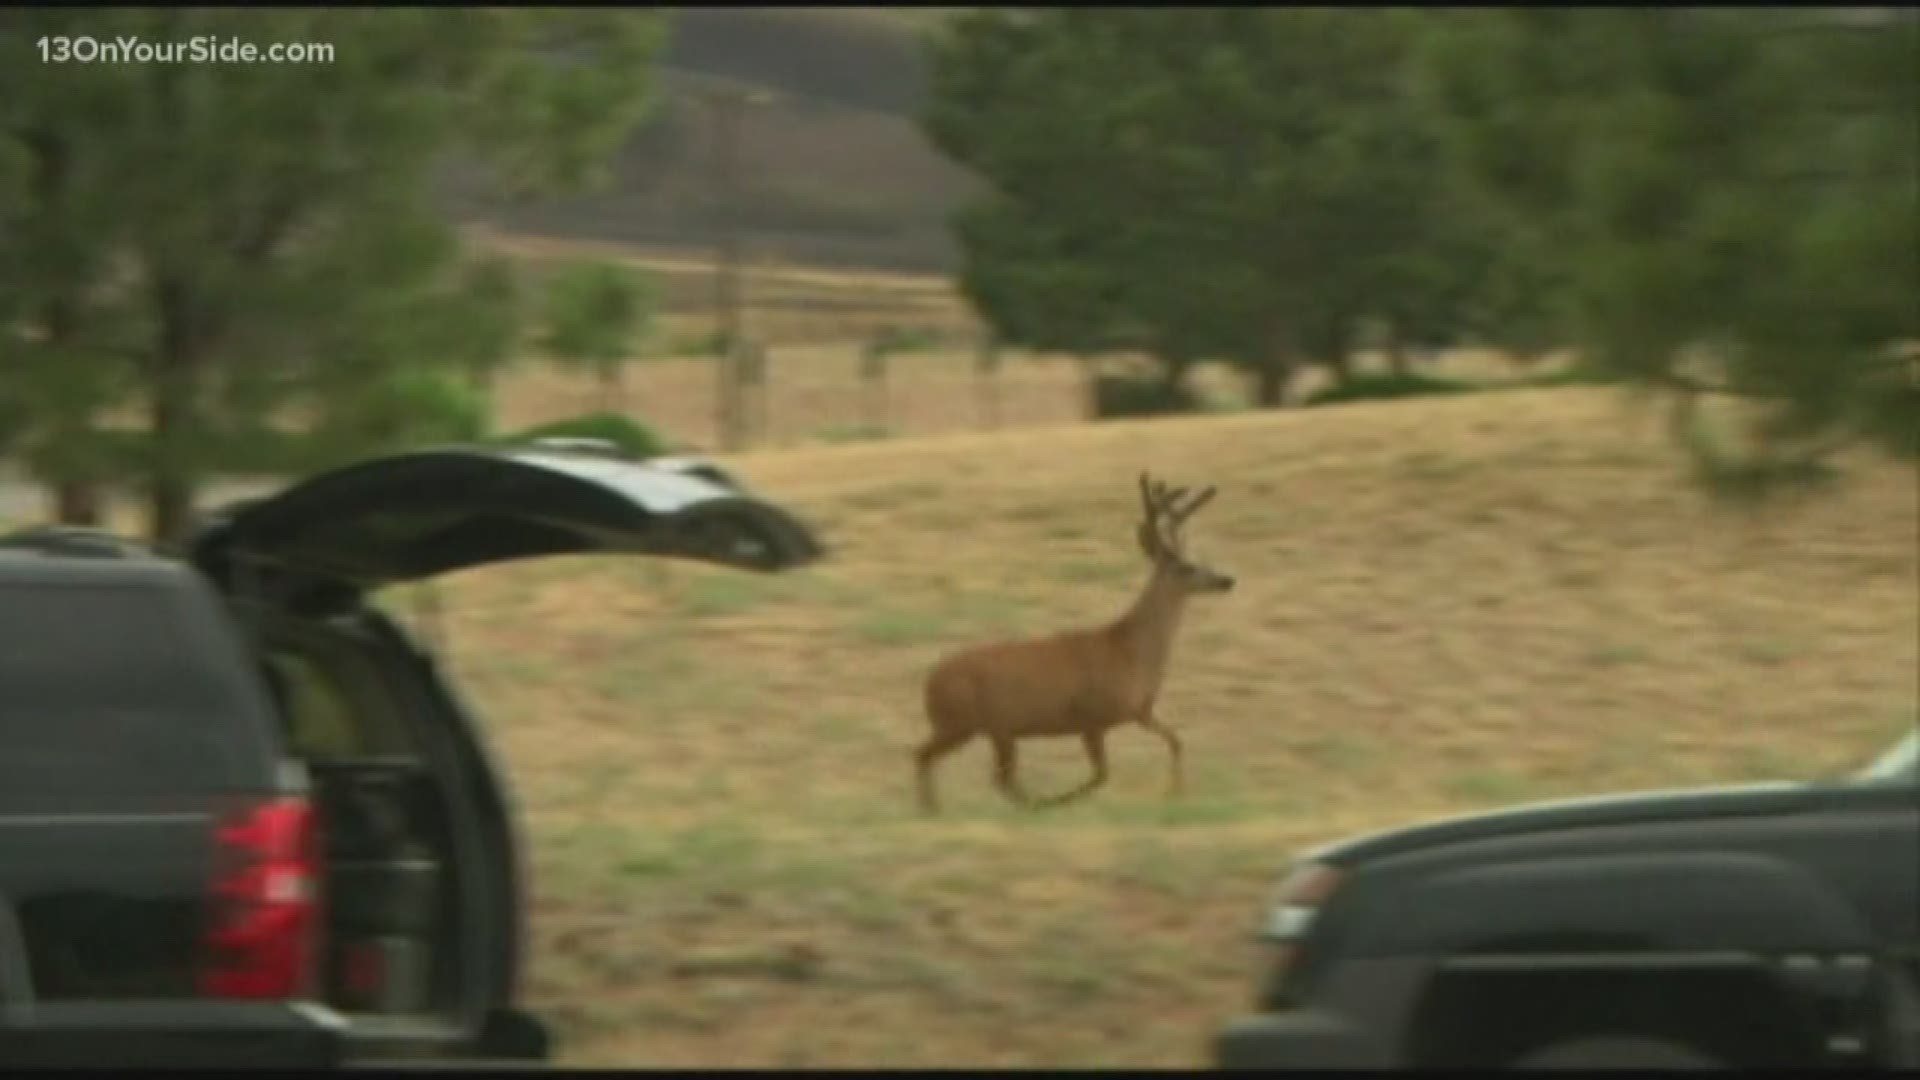 Opening Day is here and authorities are reminding people to watch for deer as they commute during dusk and dawn.